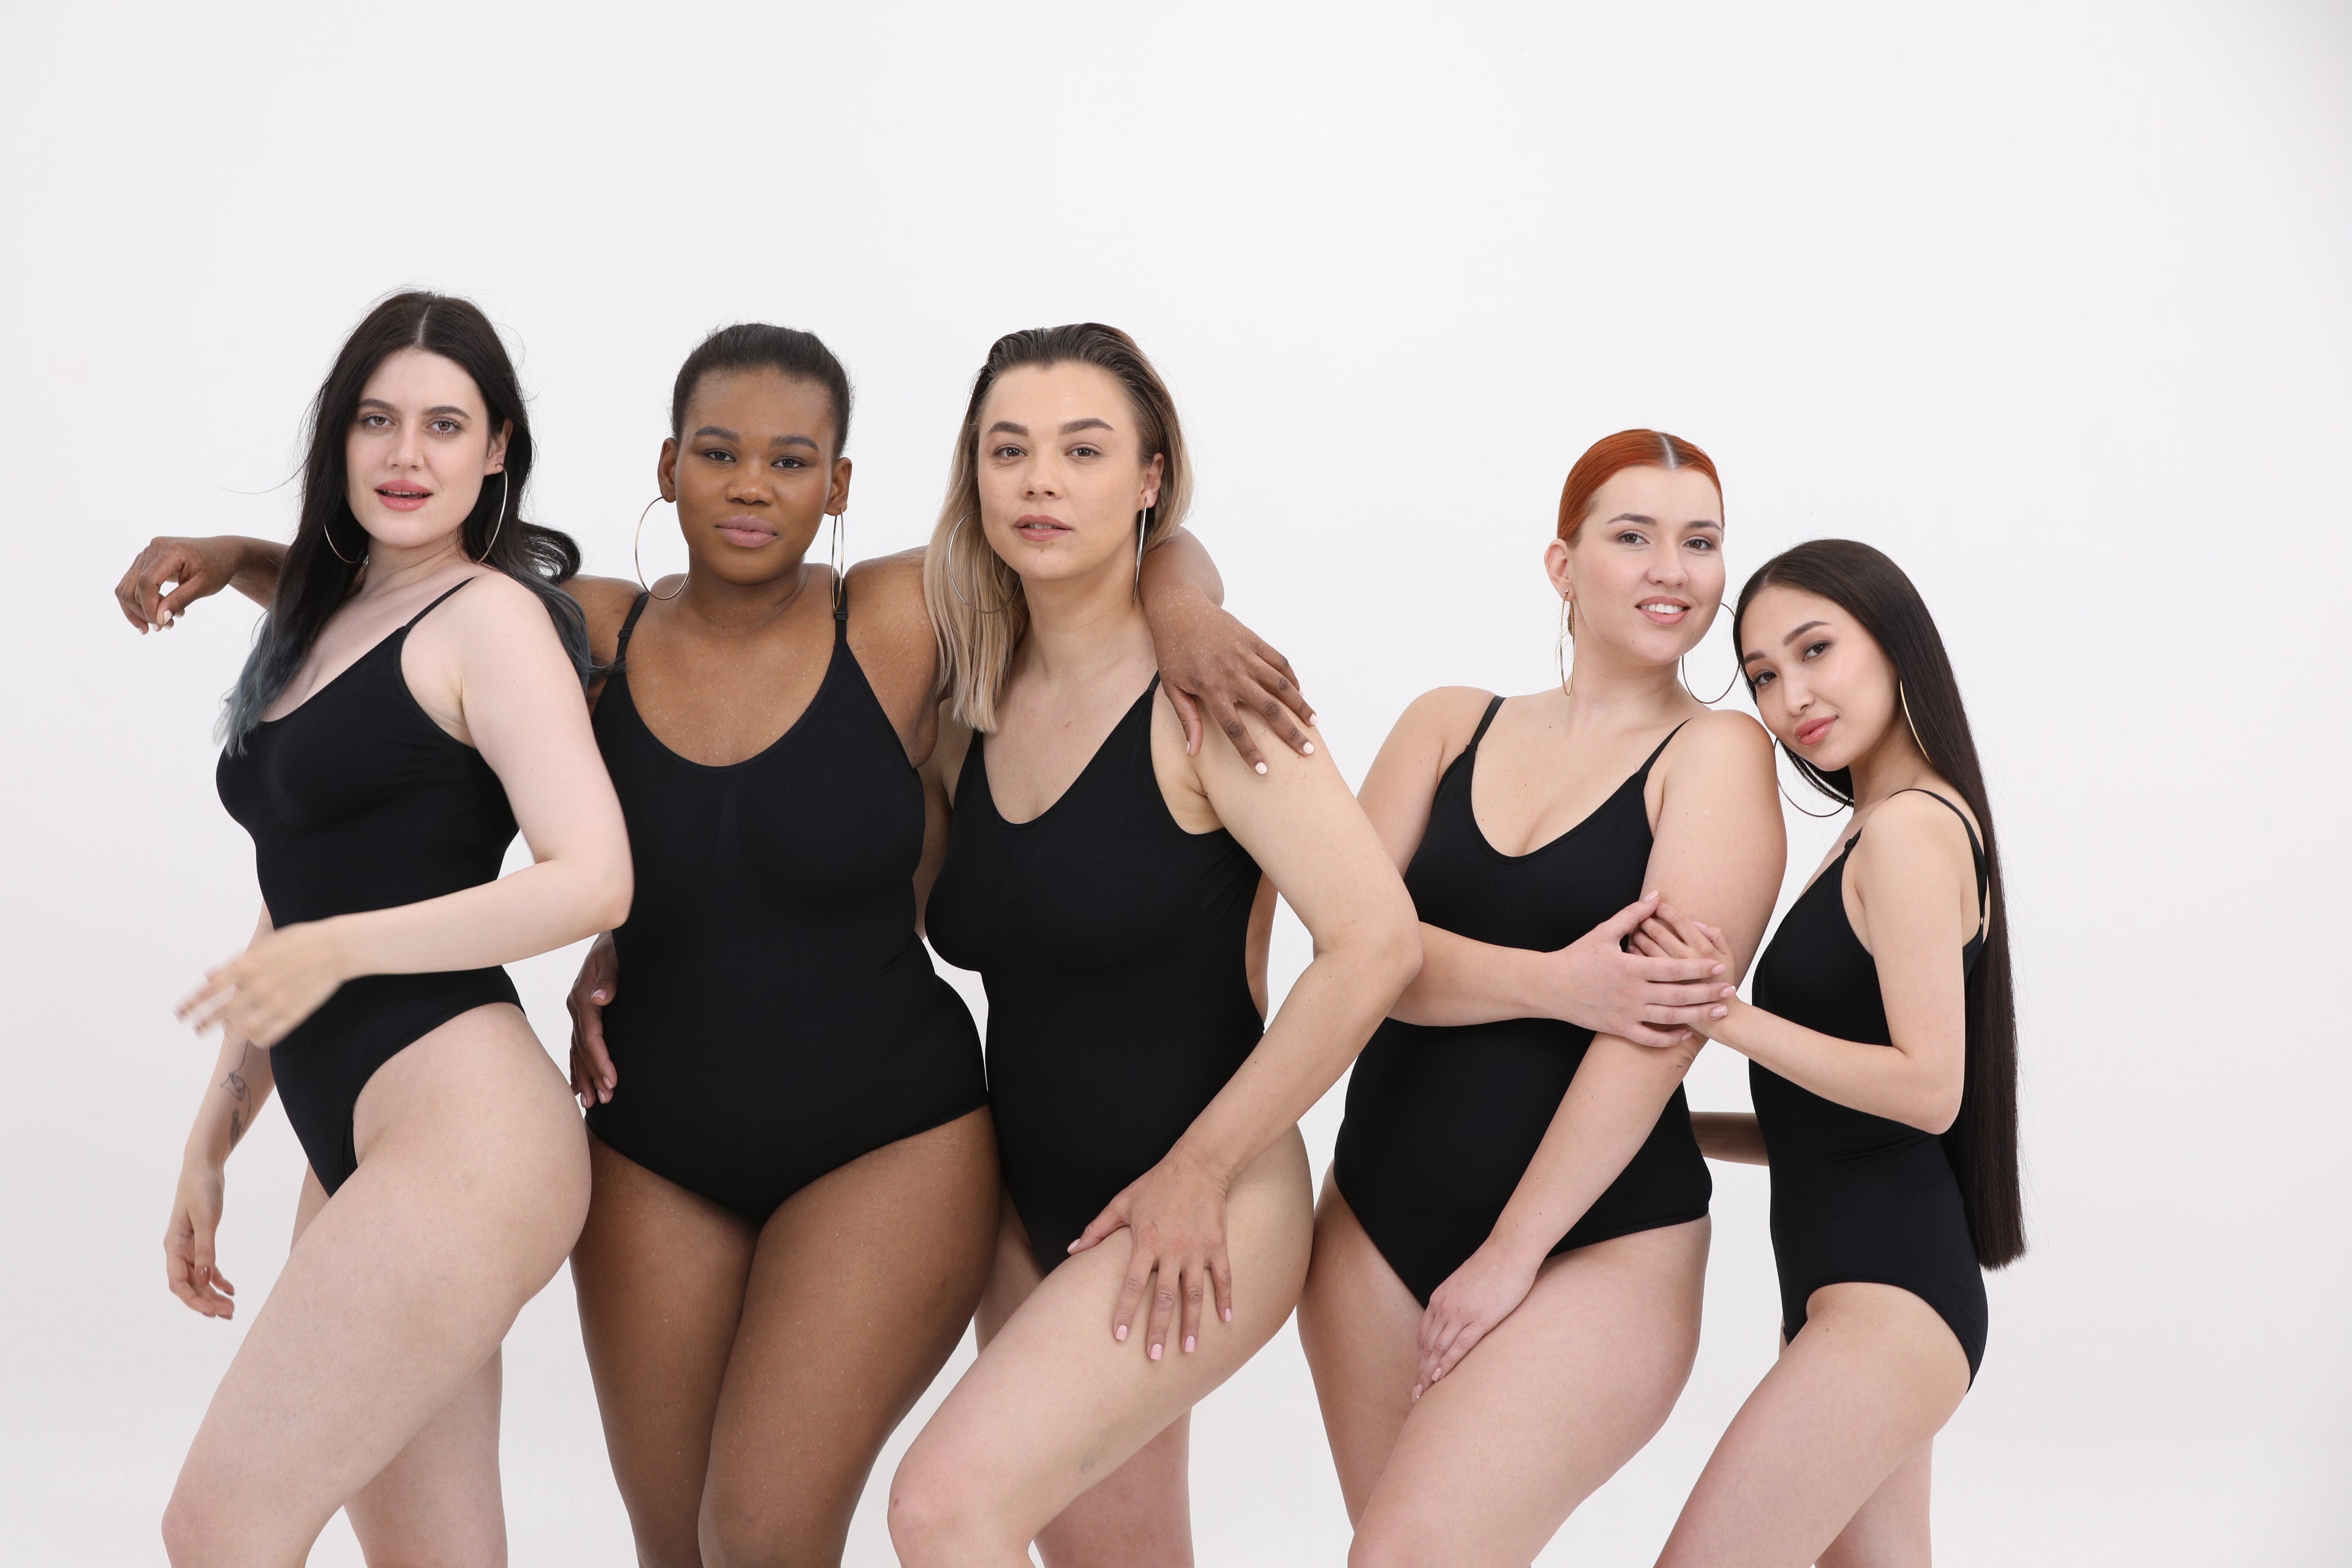 PloppyDolly Bodysuit Shapewear Review! I personally will use this